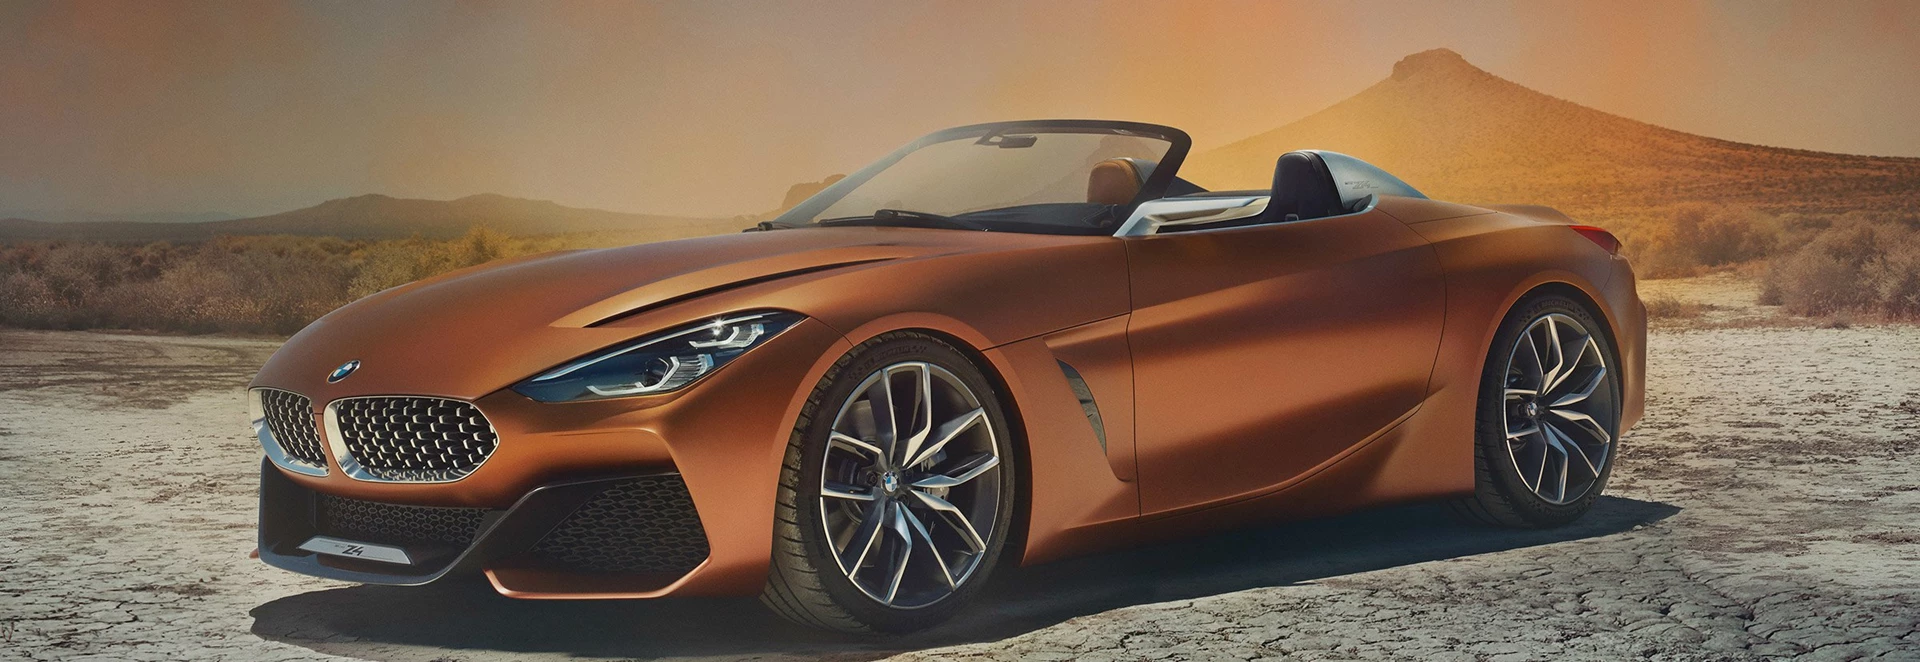 Here is the 2018 BMW Z4 concept 